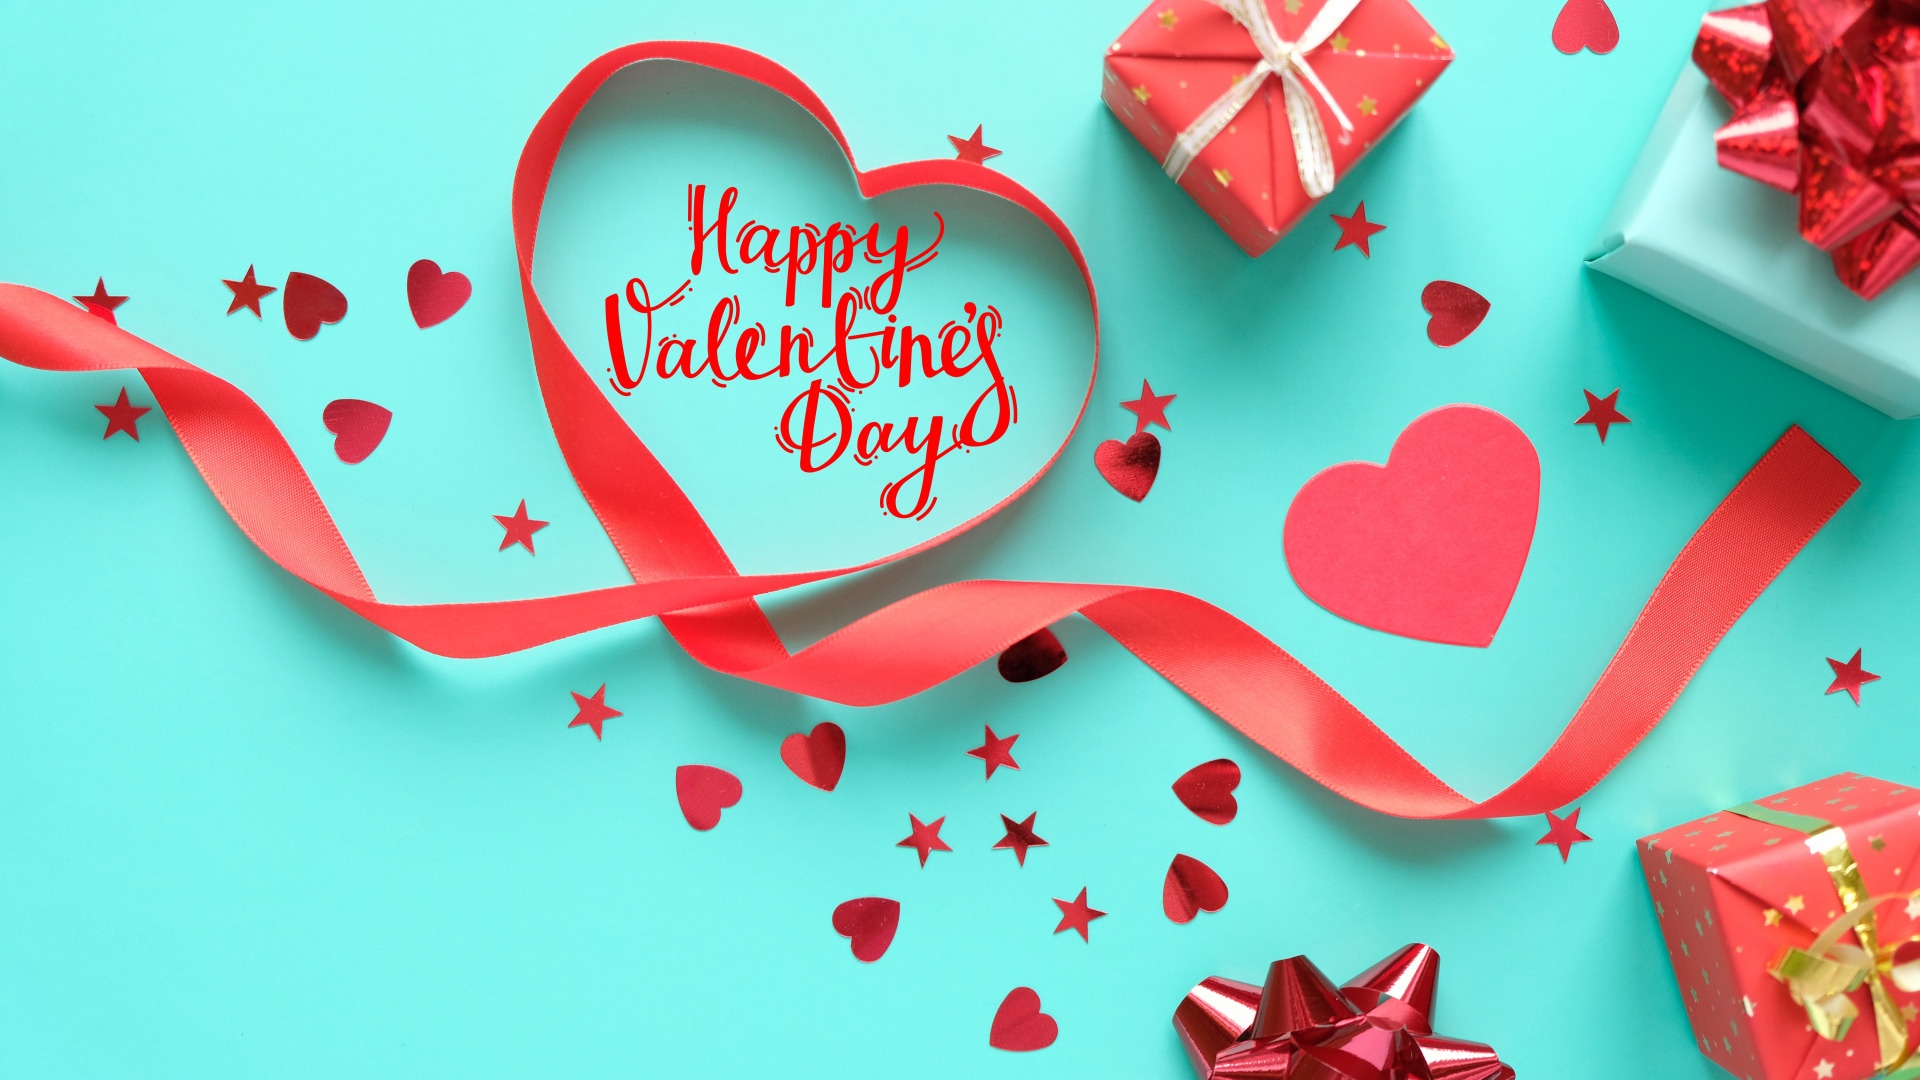 Valentines Day cool wallpaper